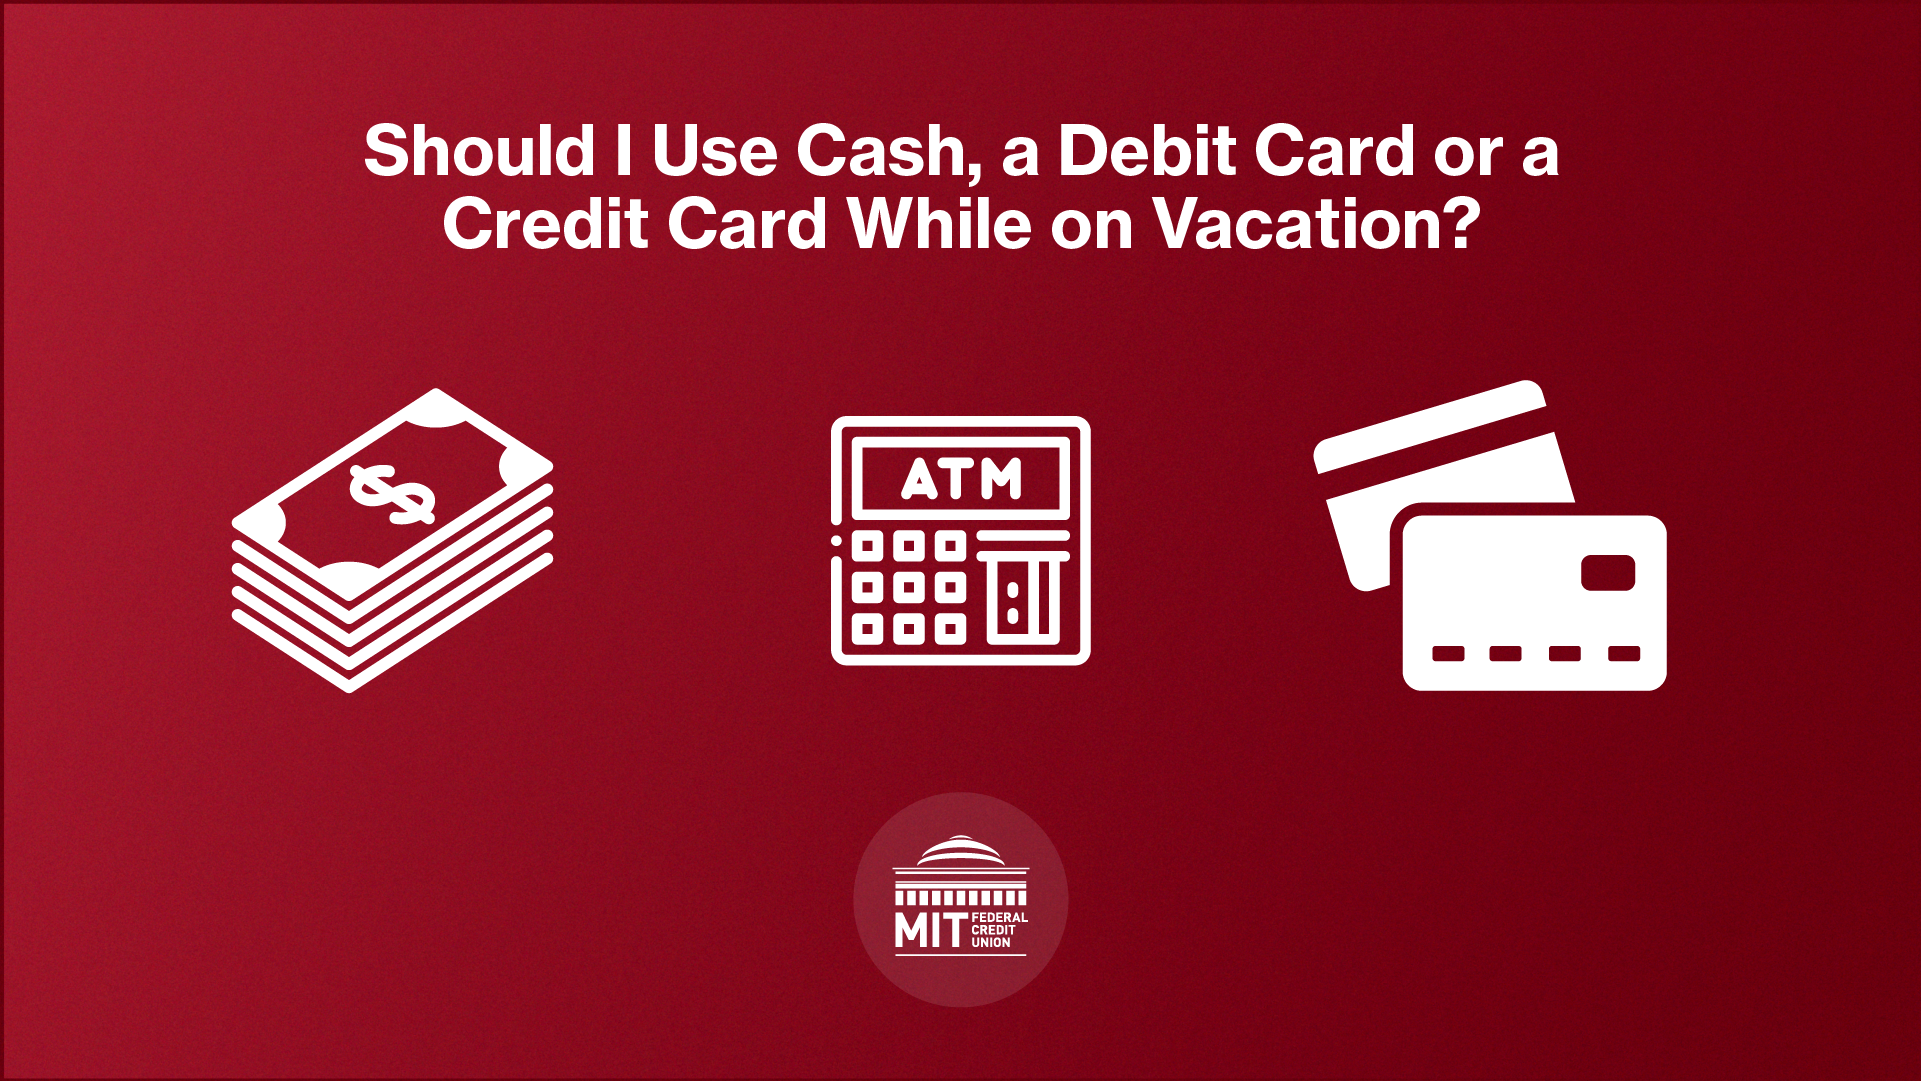 Should I Use Cash, a Debit Card or a Credit Card While on Vacation?